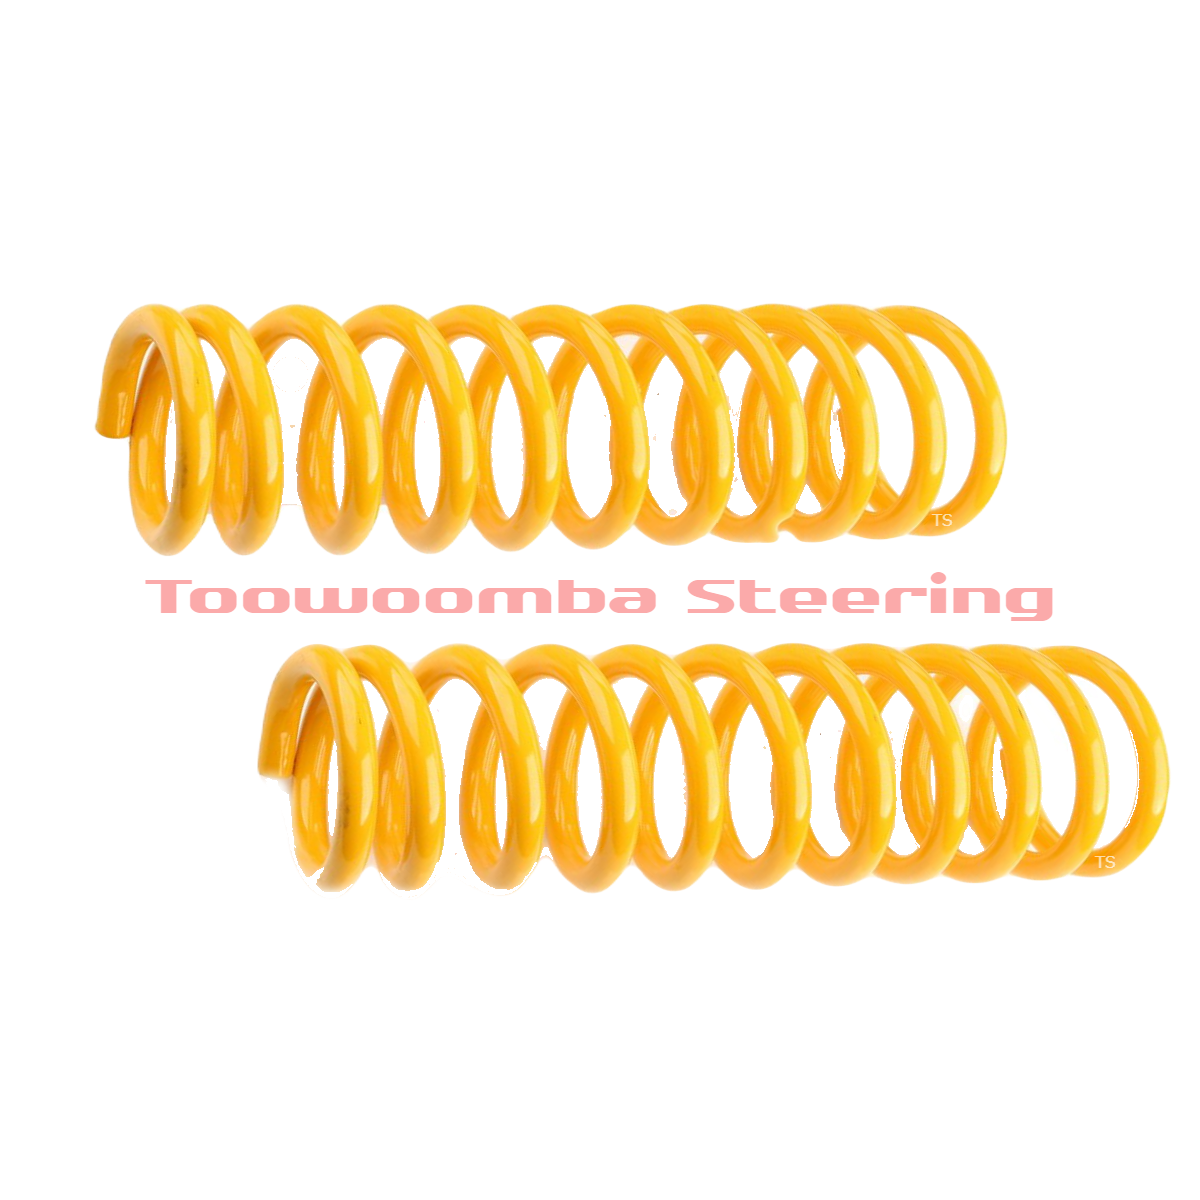 Front Lowered King Springs - Ideal for -  Subaru Liberty 5TH GEN SEDAN – 3.6 V6 & 2.5TURBO 09-14, Subaru Liberty 5TH GEN WAGON – GT ONLY 09-11/14Suits Subaru Liberty 6TH GEN SEDAN 2.5L (2014-ON) - (KSFL-42)